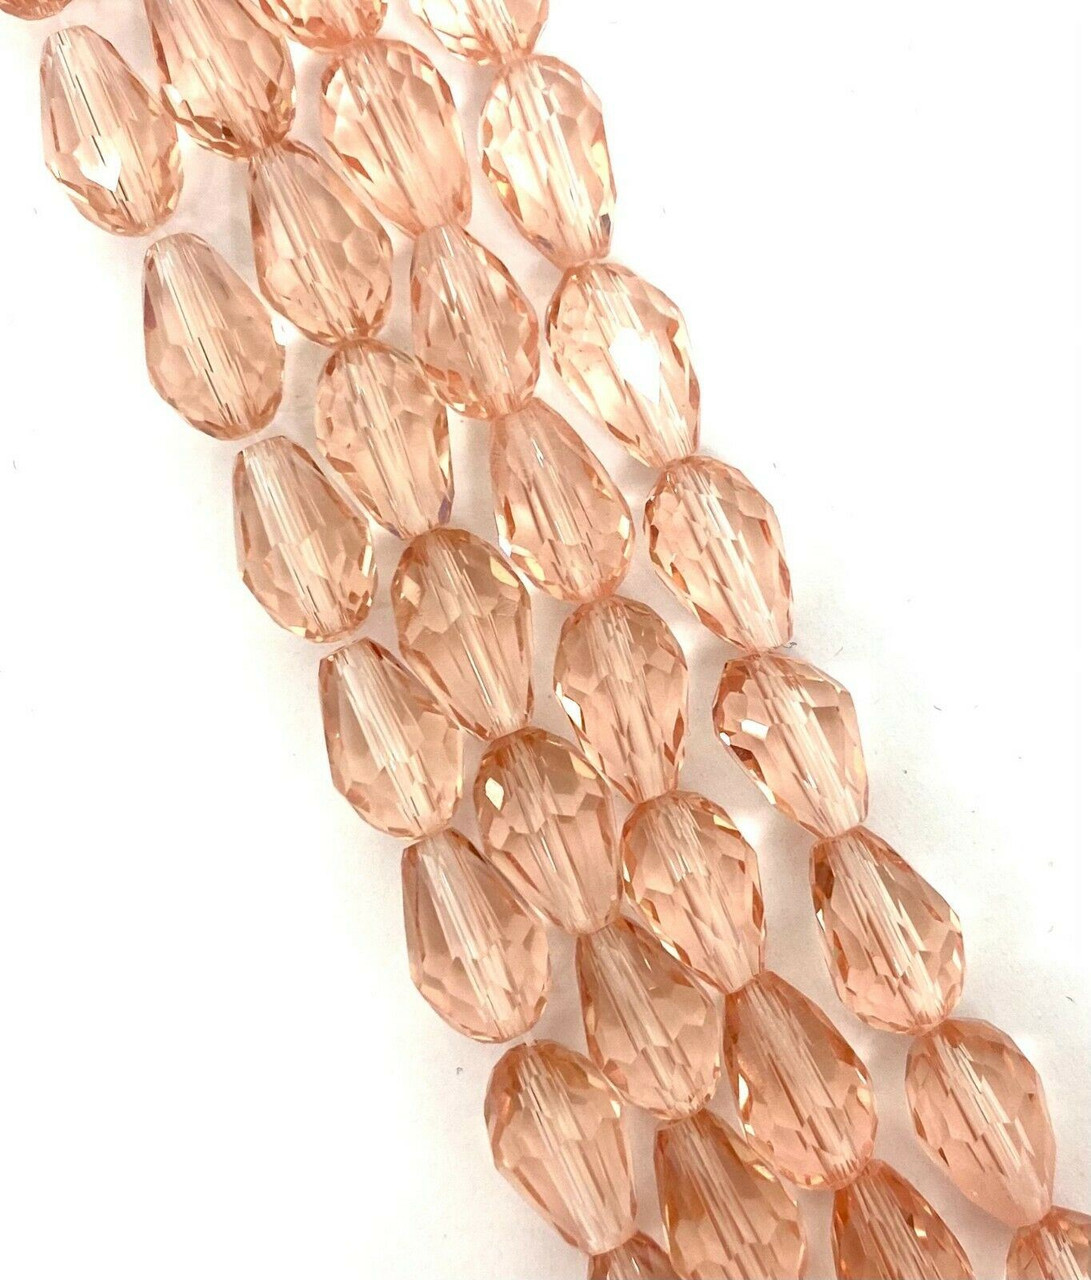 Strand of faceted glass drop beads (briolettes) - approx 11x8mm, Pink, approx 60 beads